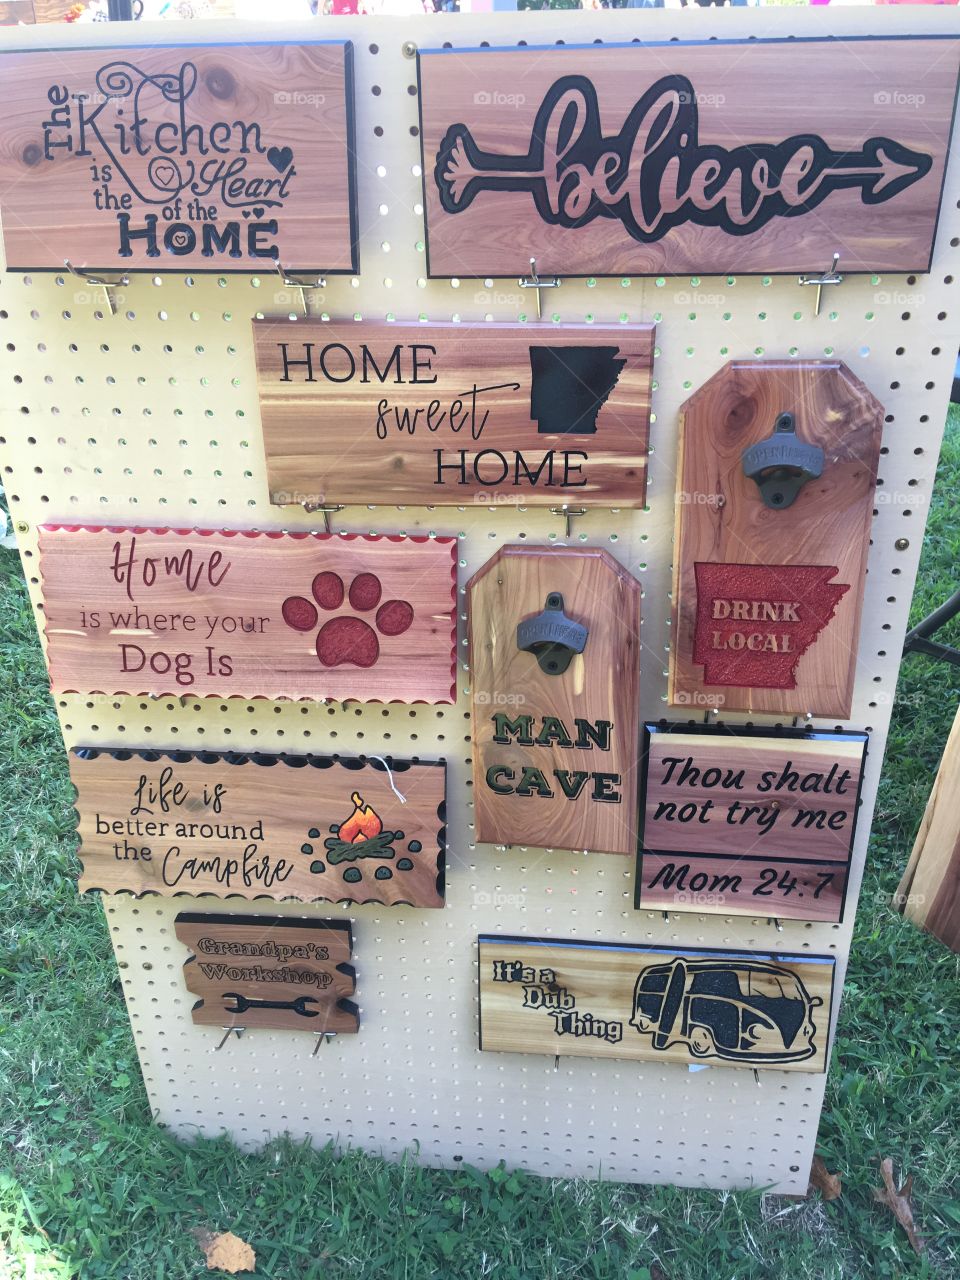 More handmade signs at the fair just for fun! Looks like cedar signs well made.